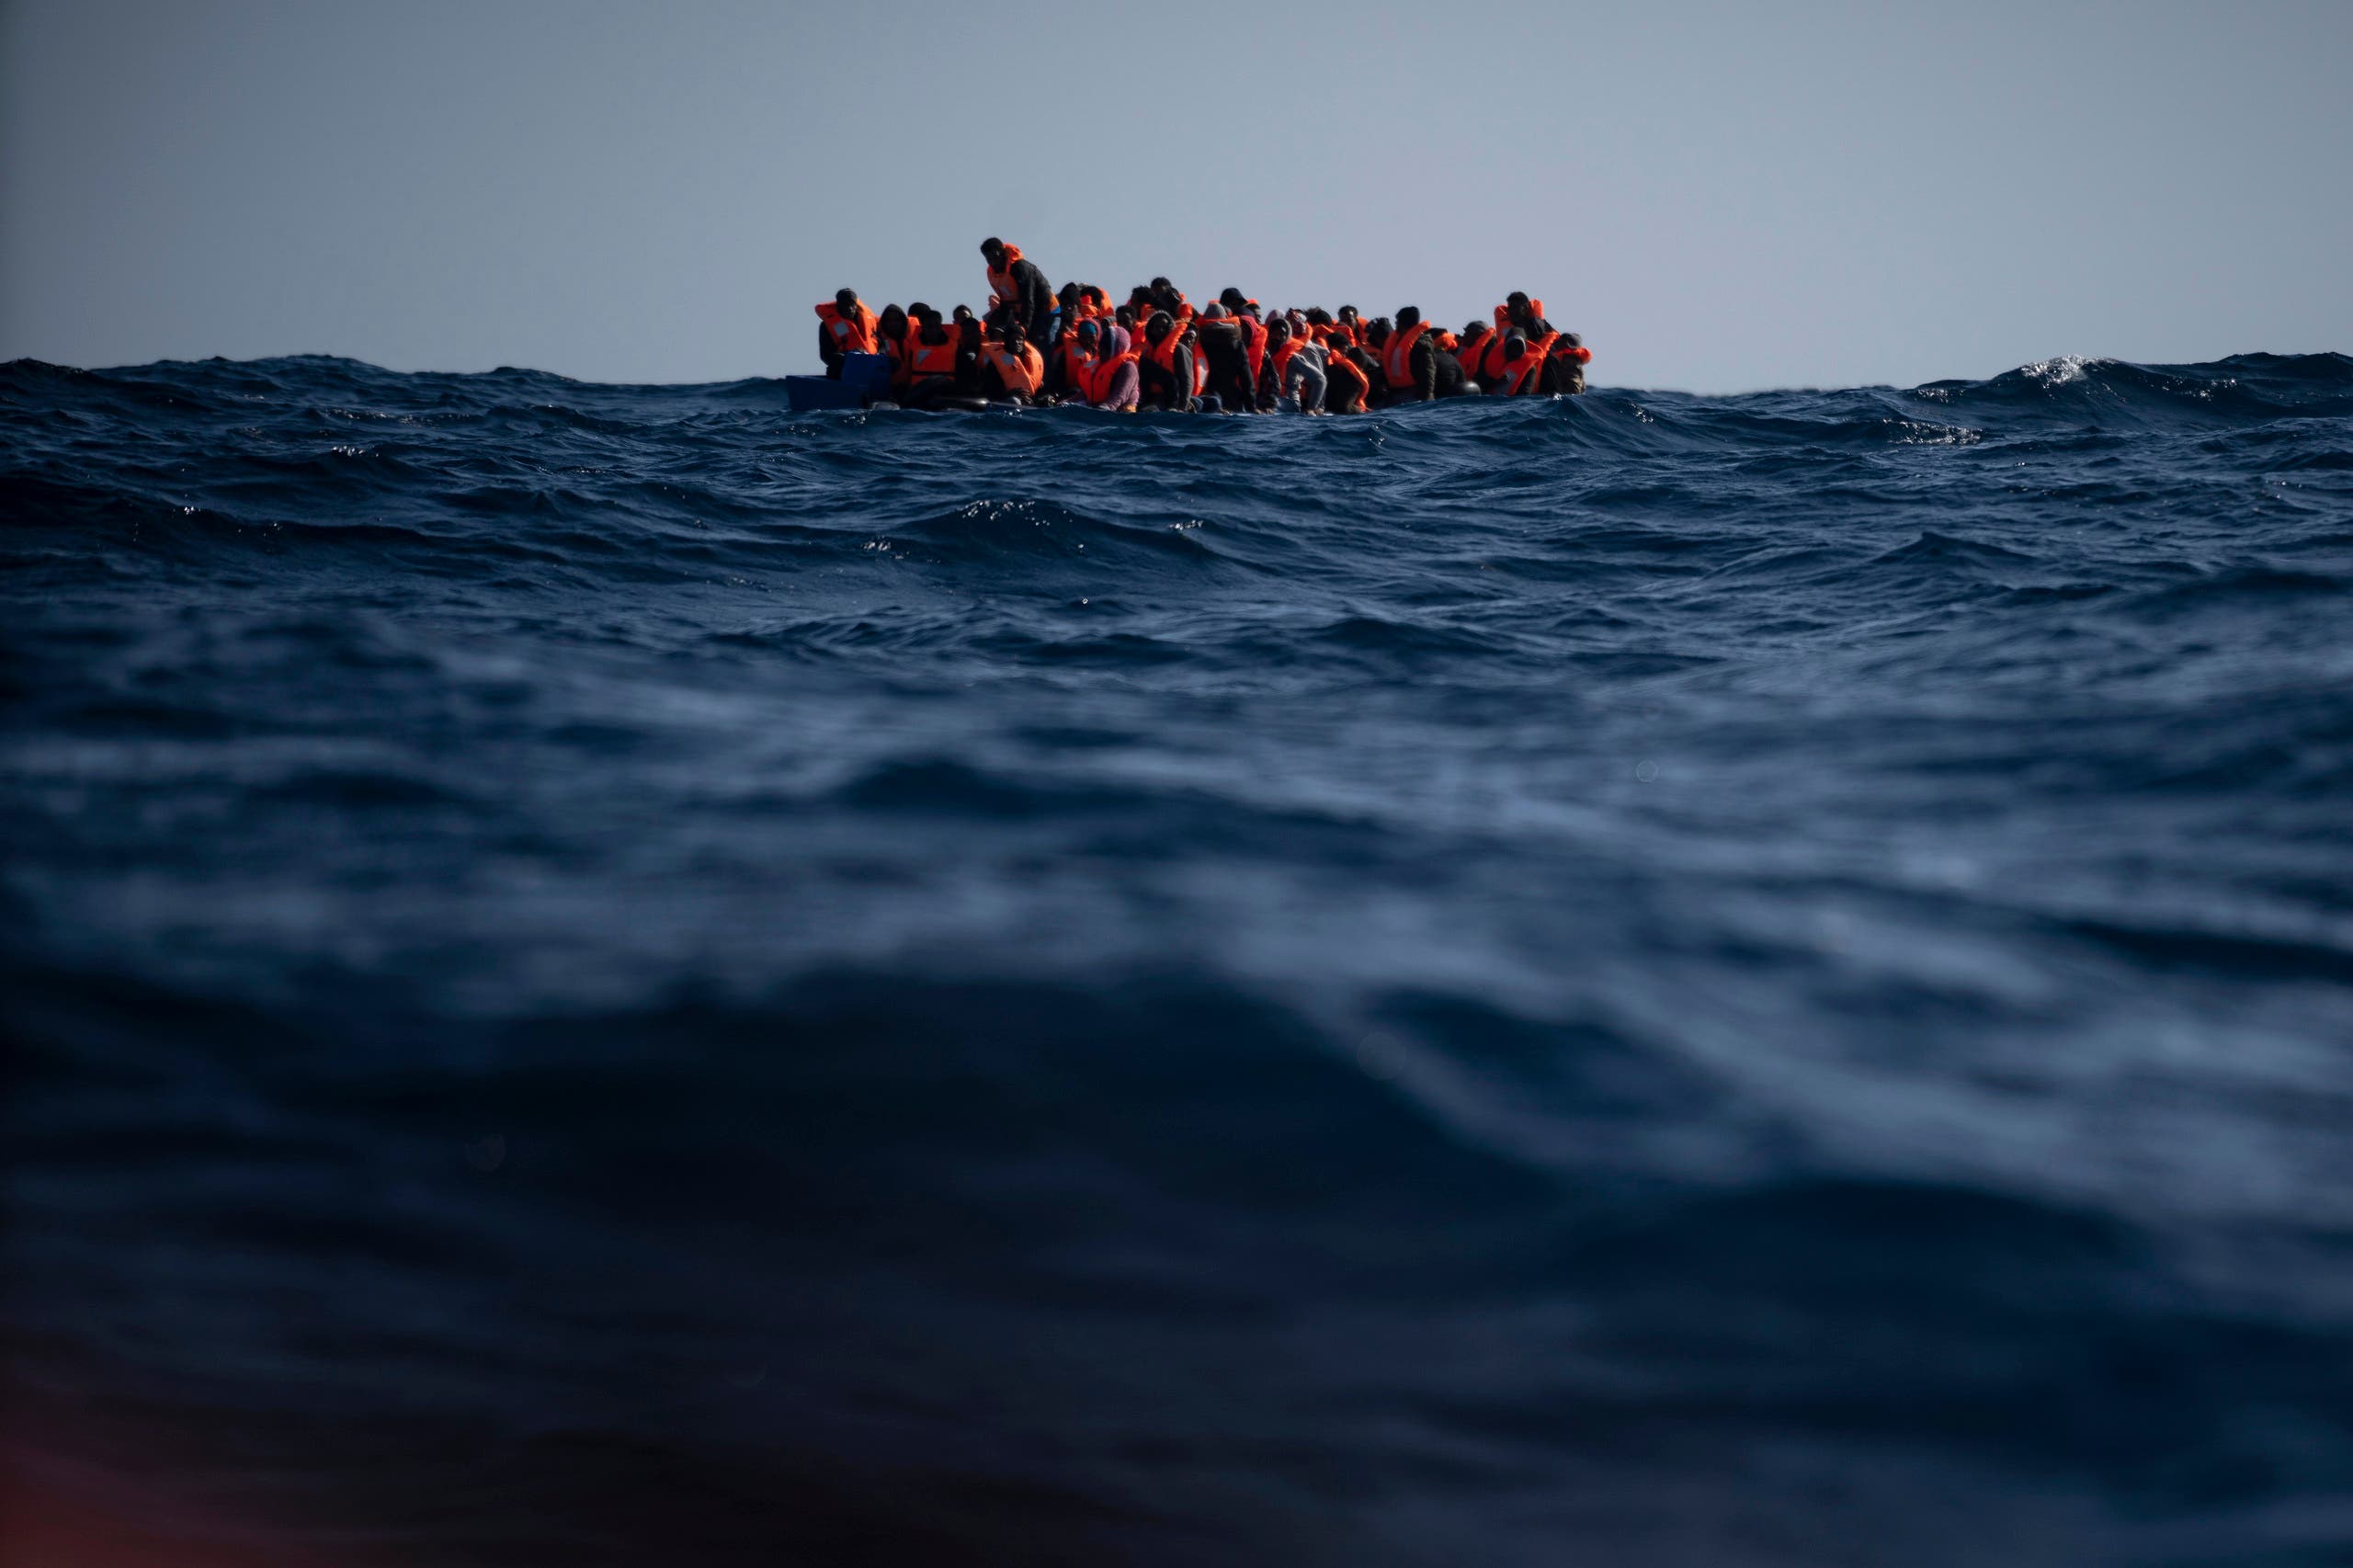 Migrants from Eritrea, Egypt, Syria and Sudan, wait to be assisted by aid workers of the Spanish NGO Open Arms, after fleeing Libya on board a precarious wooden boat in the Mediterranean sea, about 110 miles north of Libya. (File photo: AP)